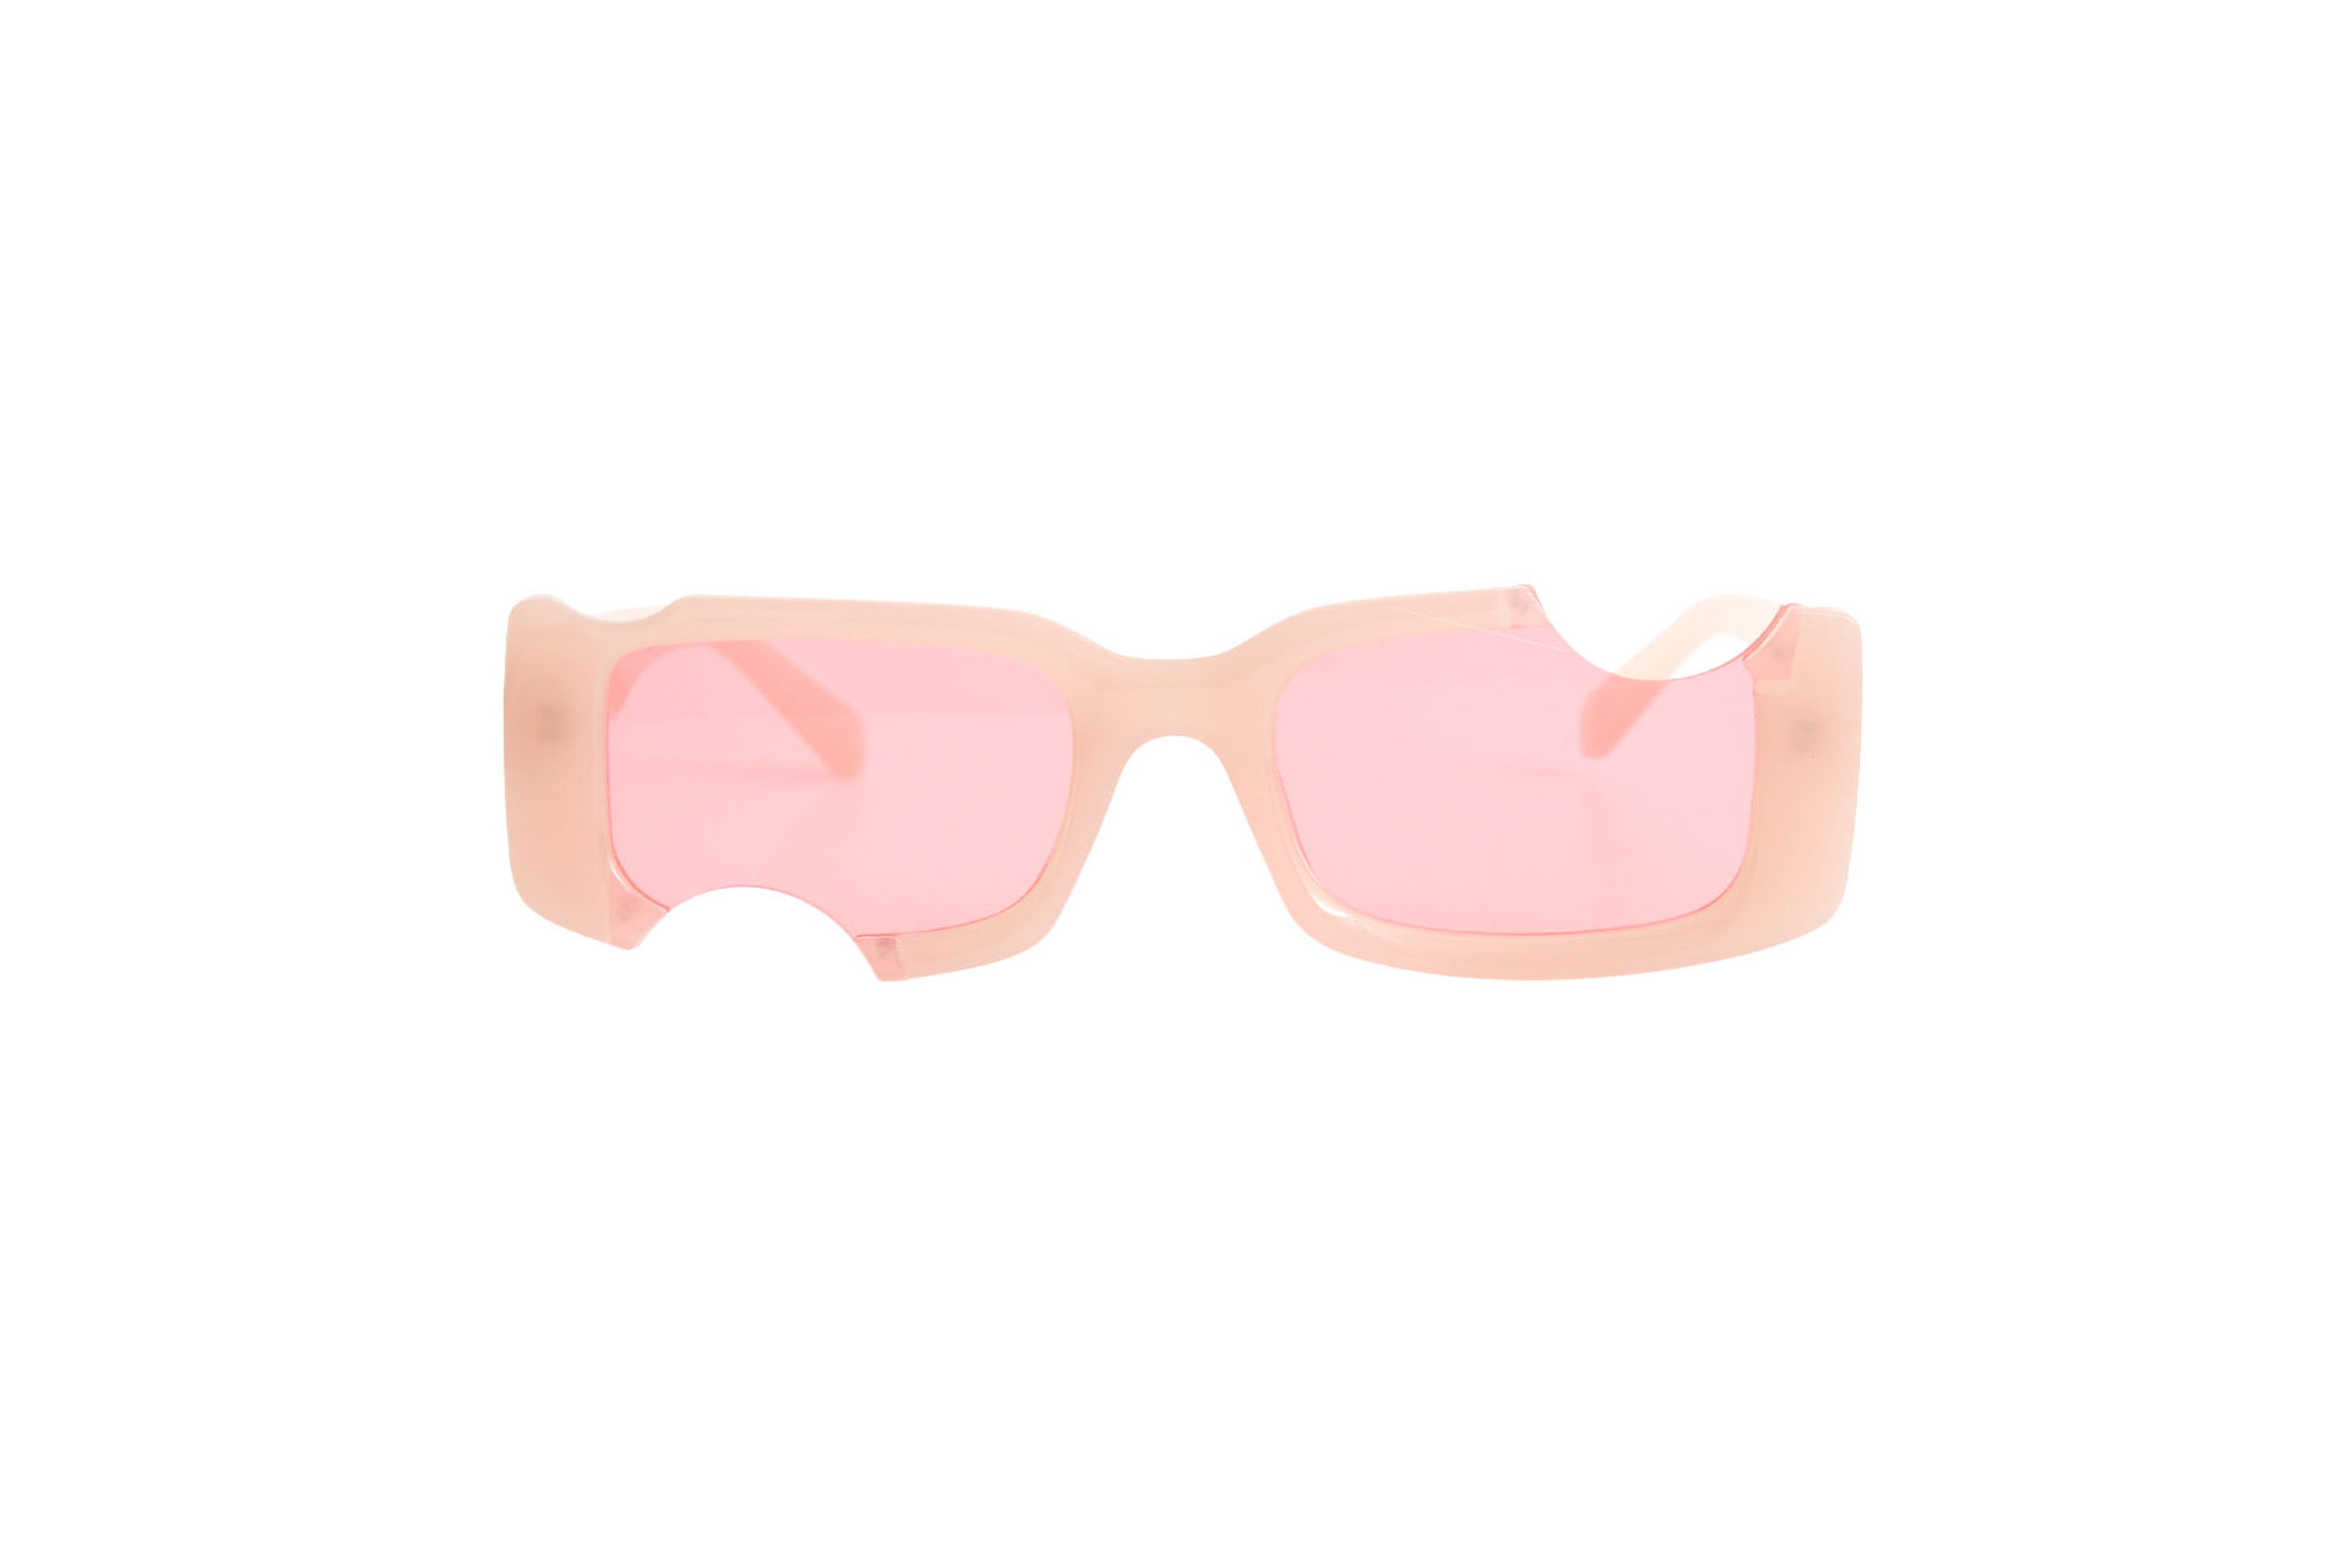 PUZZLE SUNGLASSES - M'Squared Beauty Supply